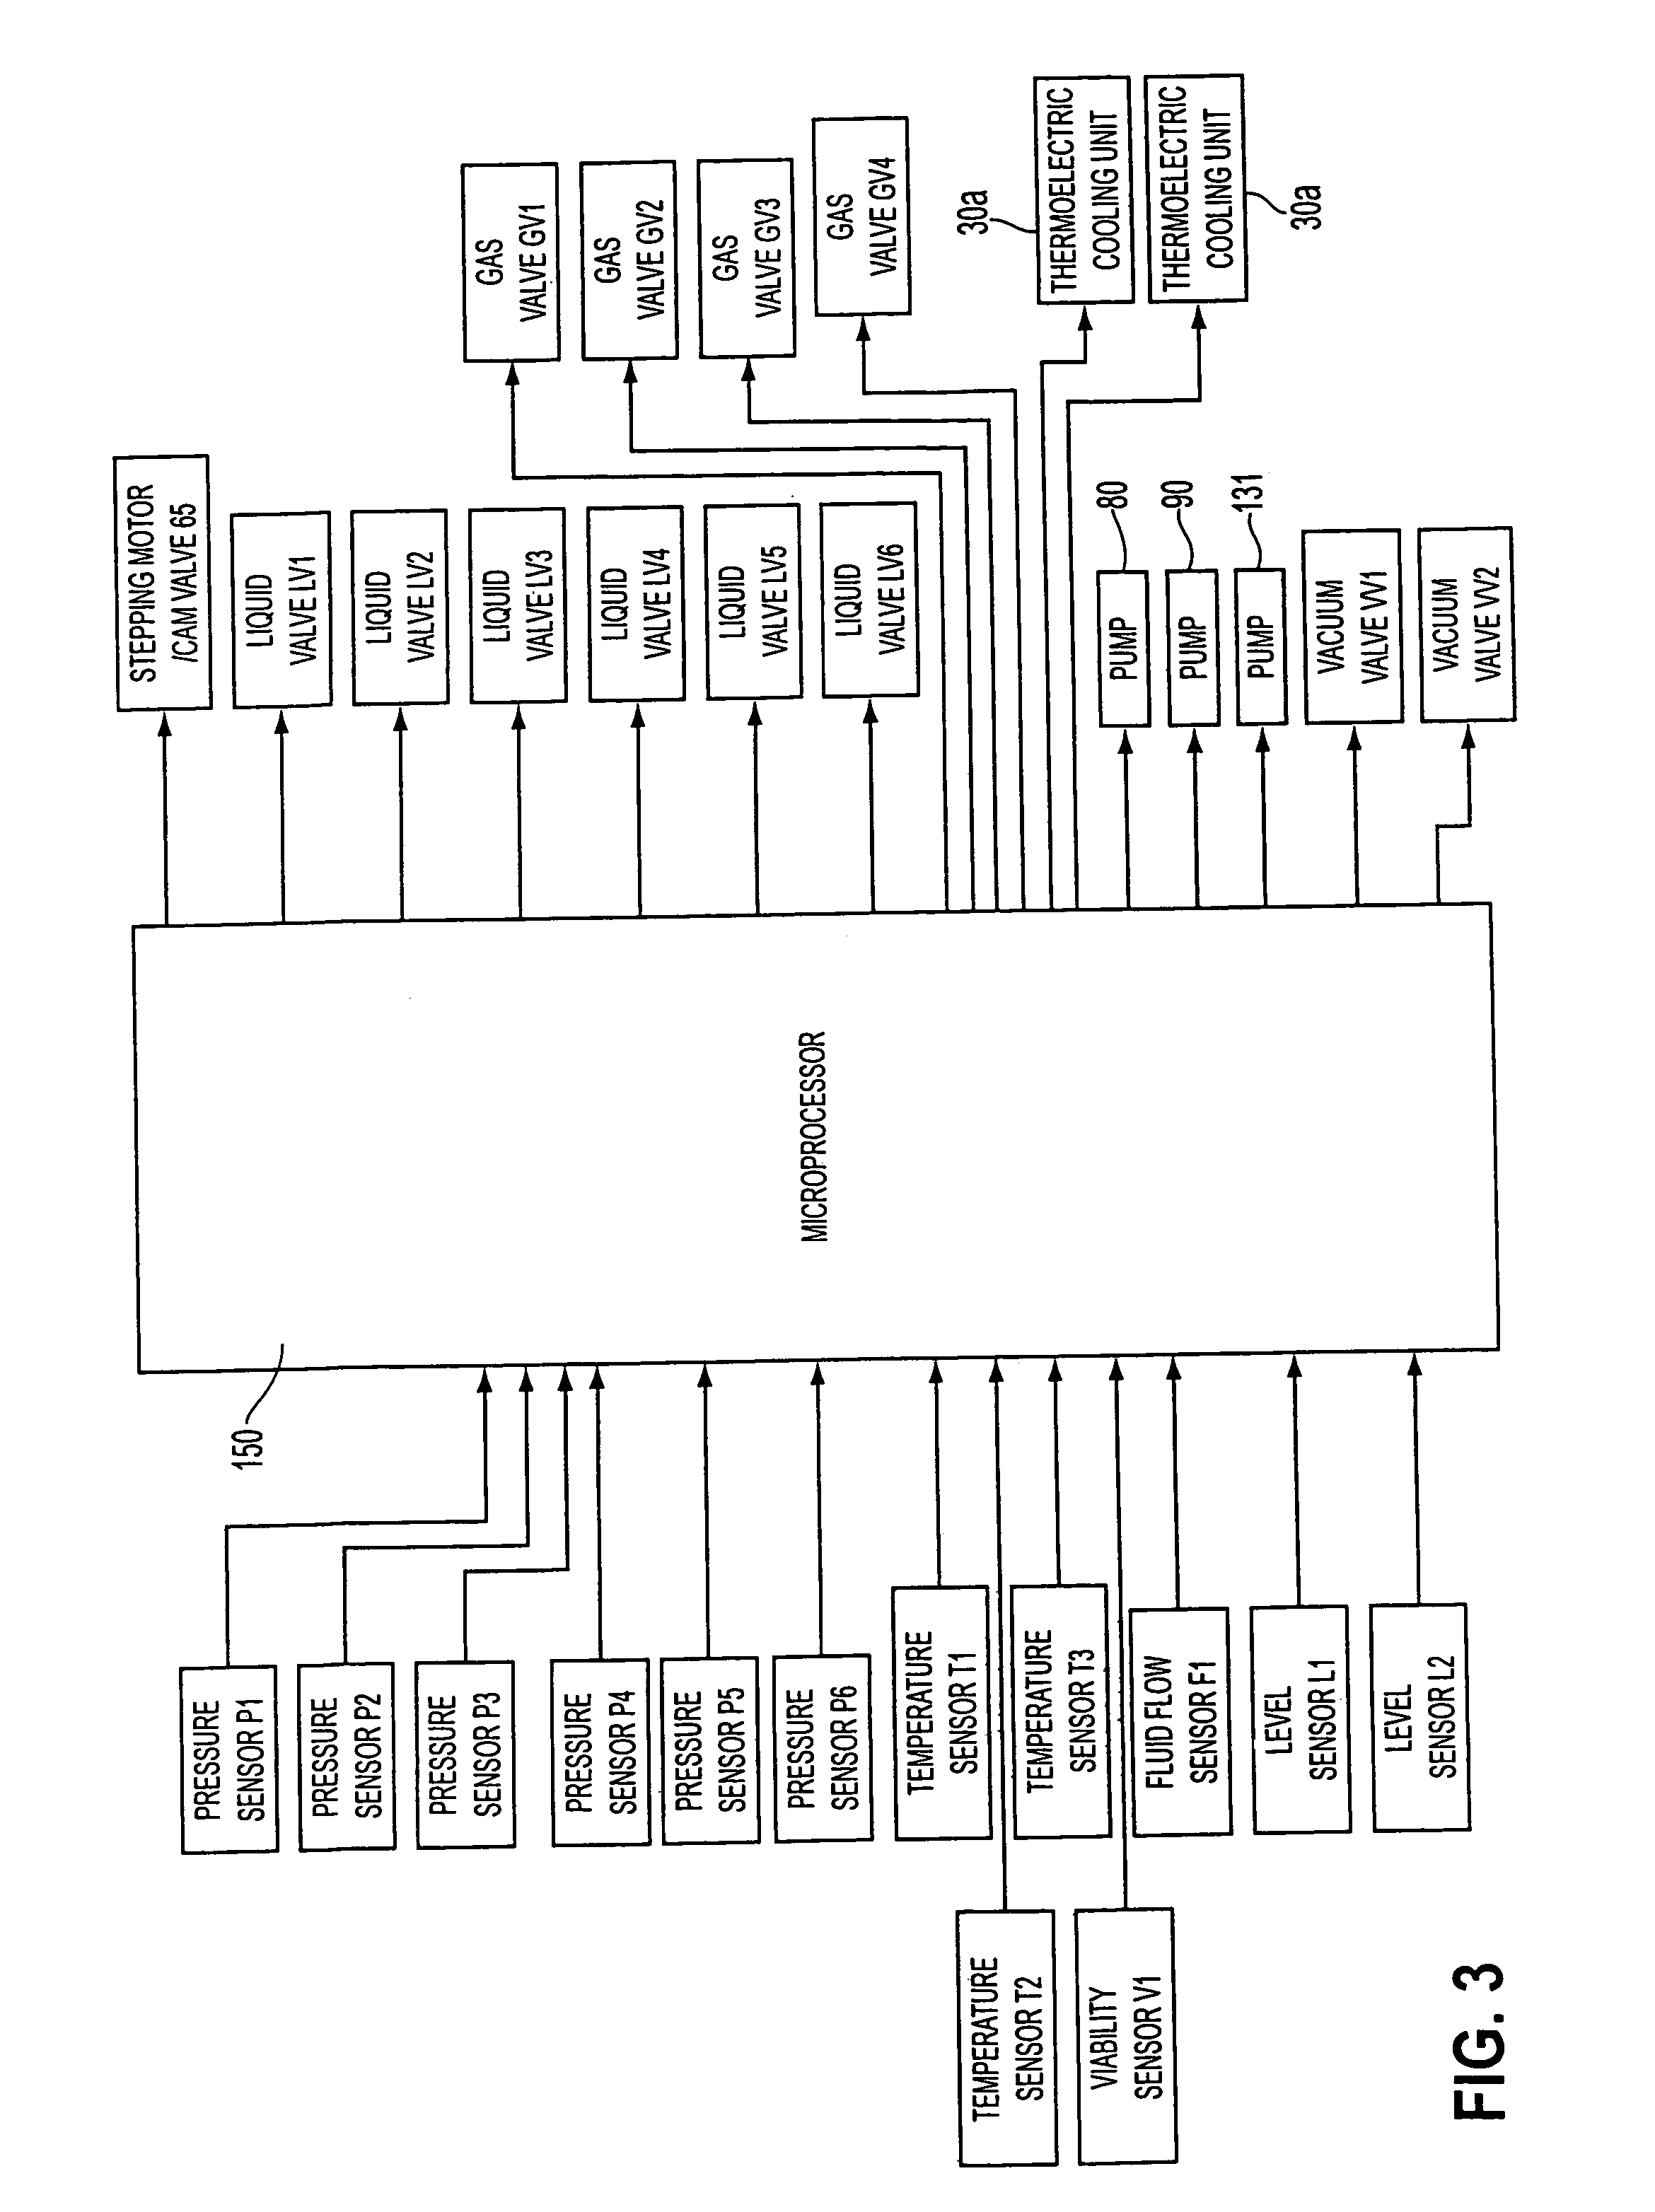 Method for perfusing an organ and for isolating cells from the organ